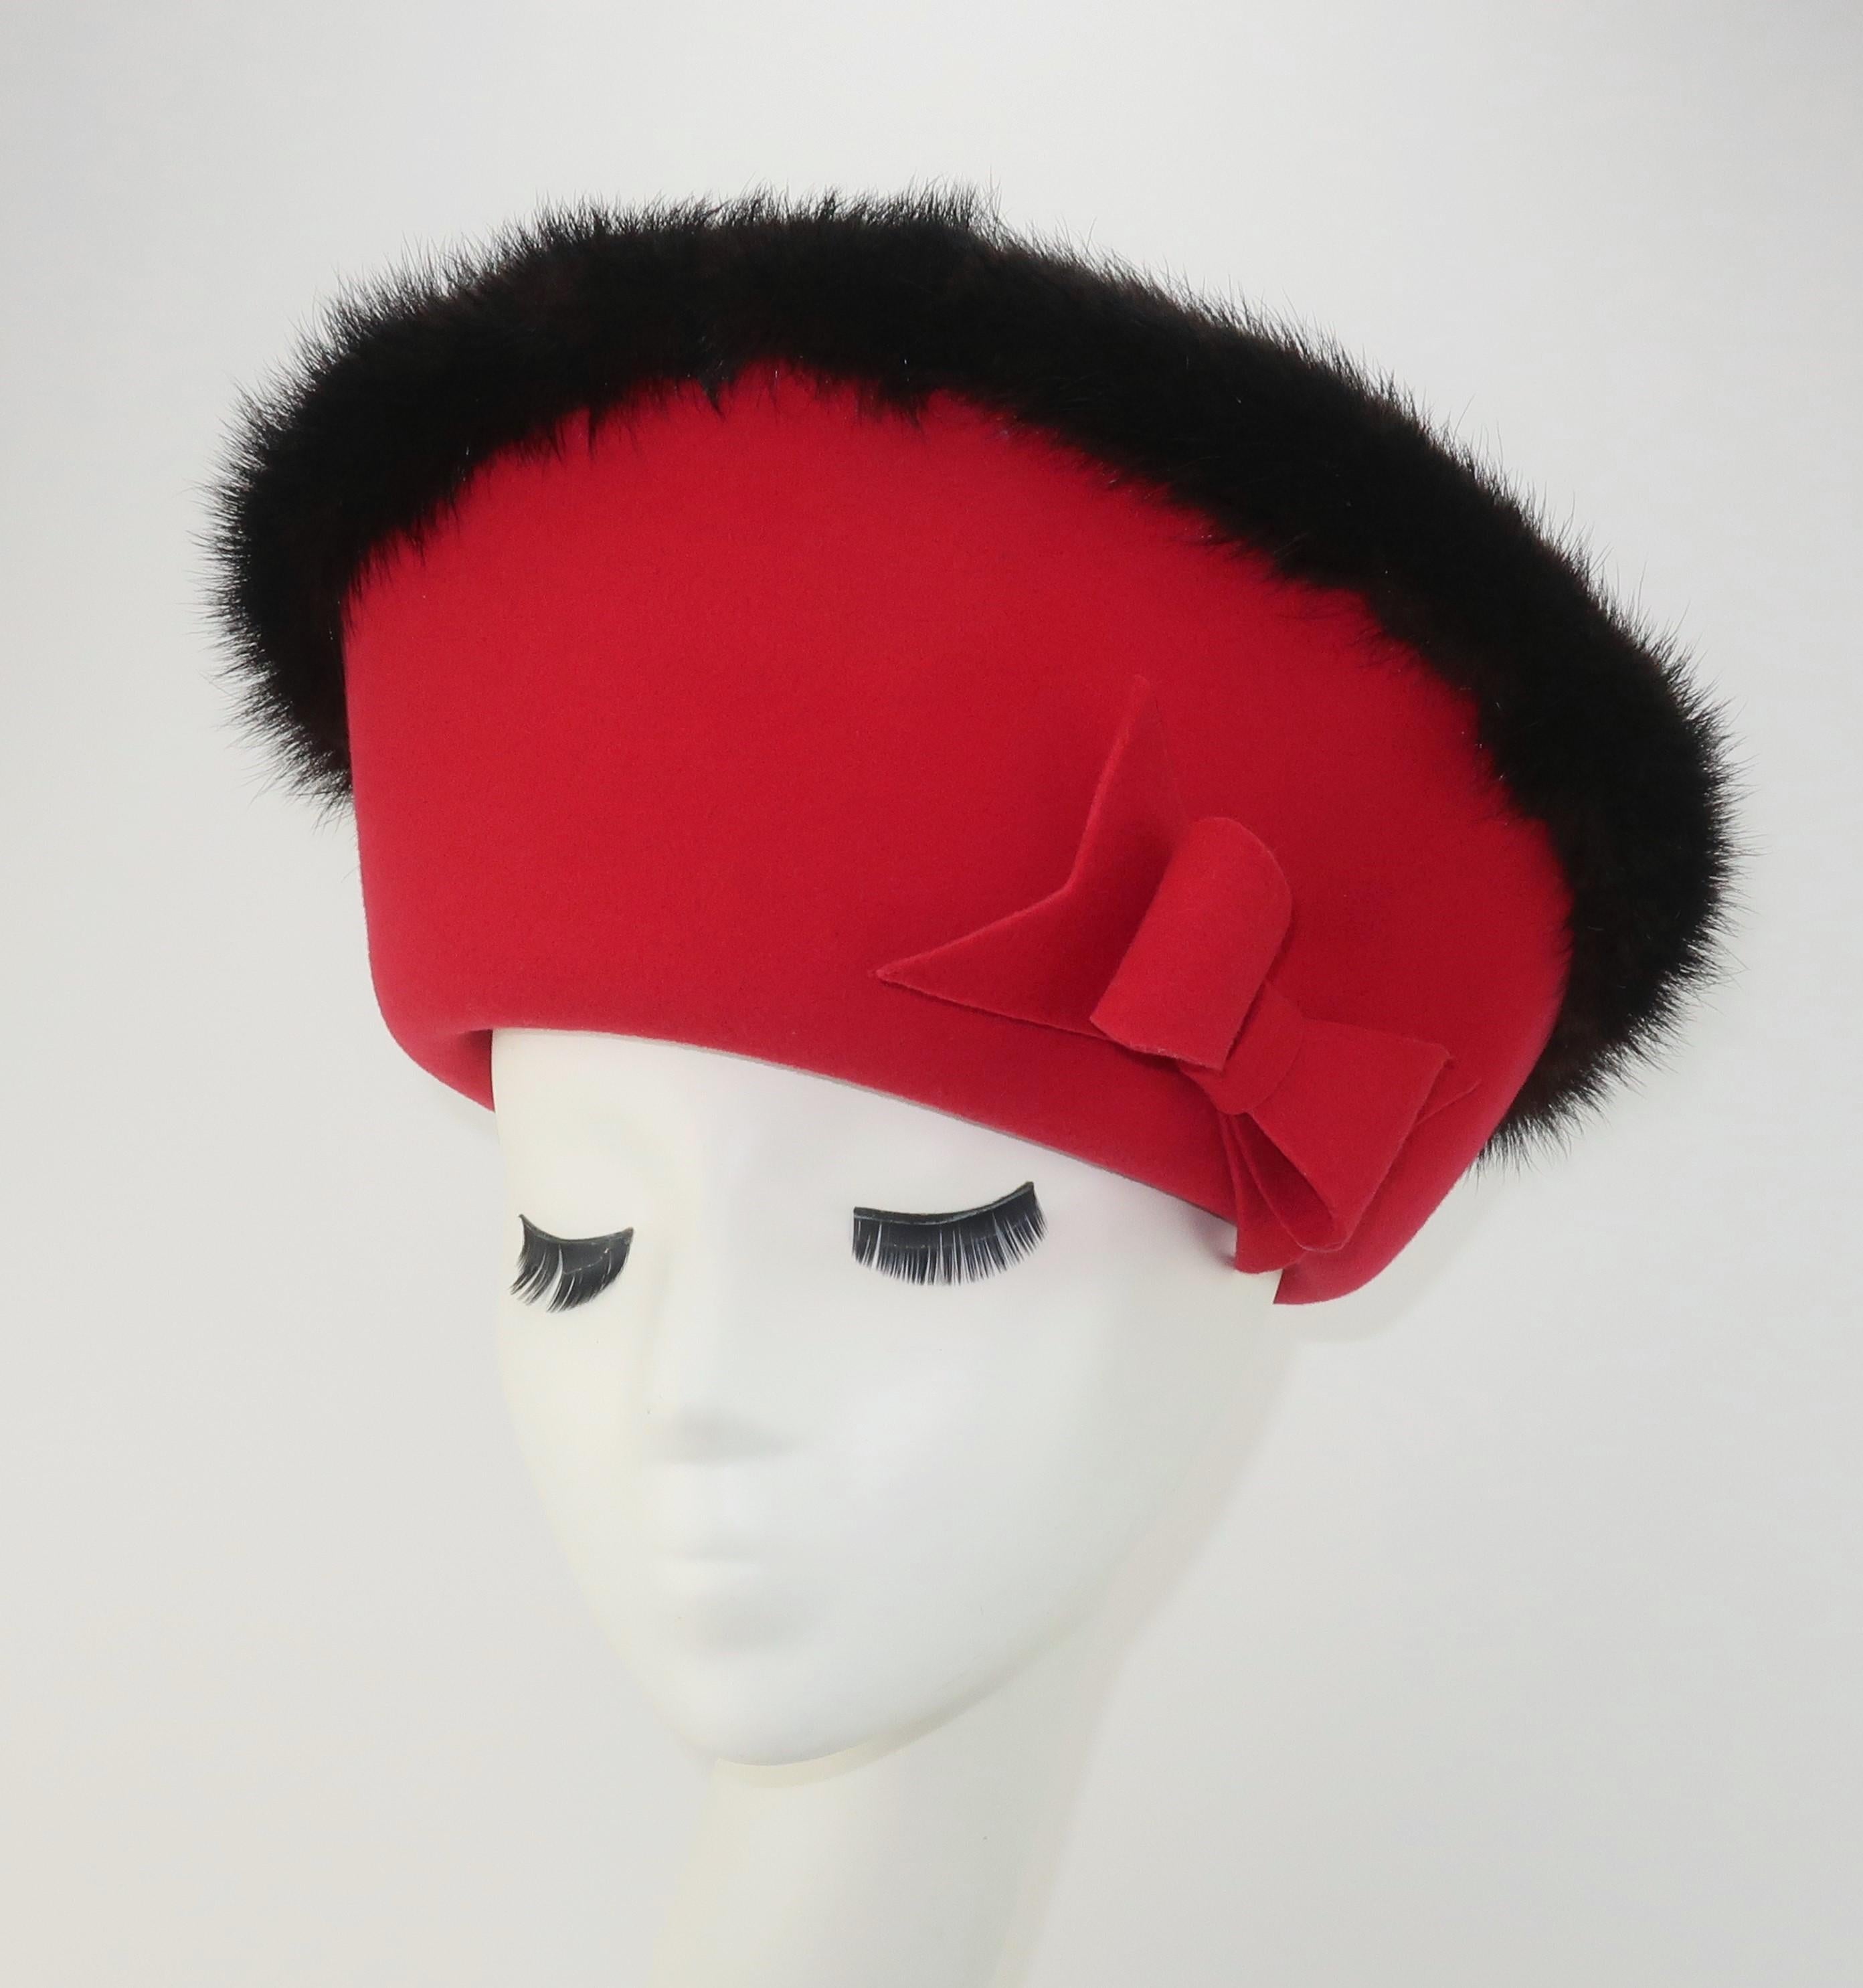 1960's Mr. John Jr. red wool hat with the fabulous presence of a crown.  The grand silhouette is enhanced by dark brown (almost black) mink fur trim and a girlish bow.  Mr. John hats were created by milliner, John Harberger, who was part of the